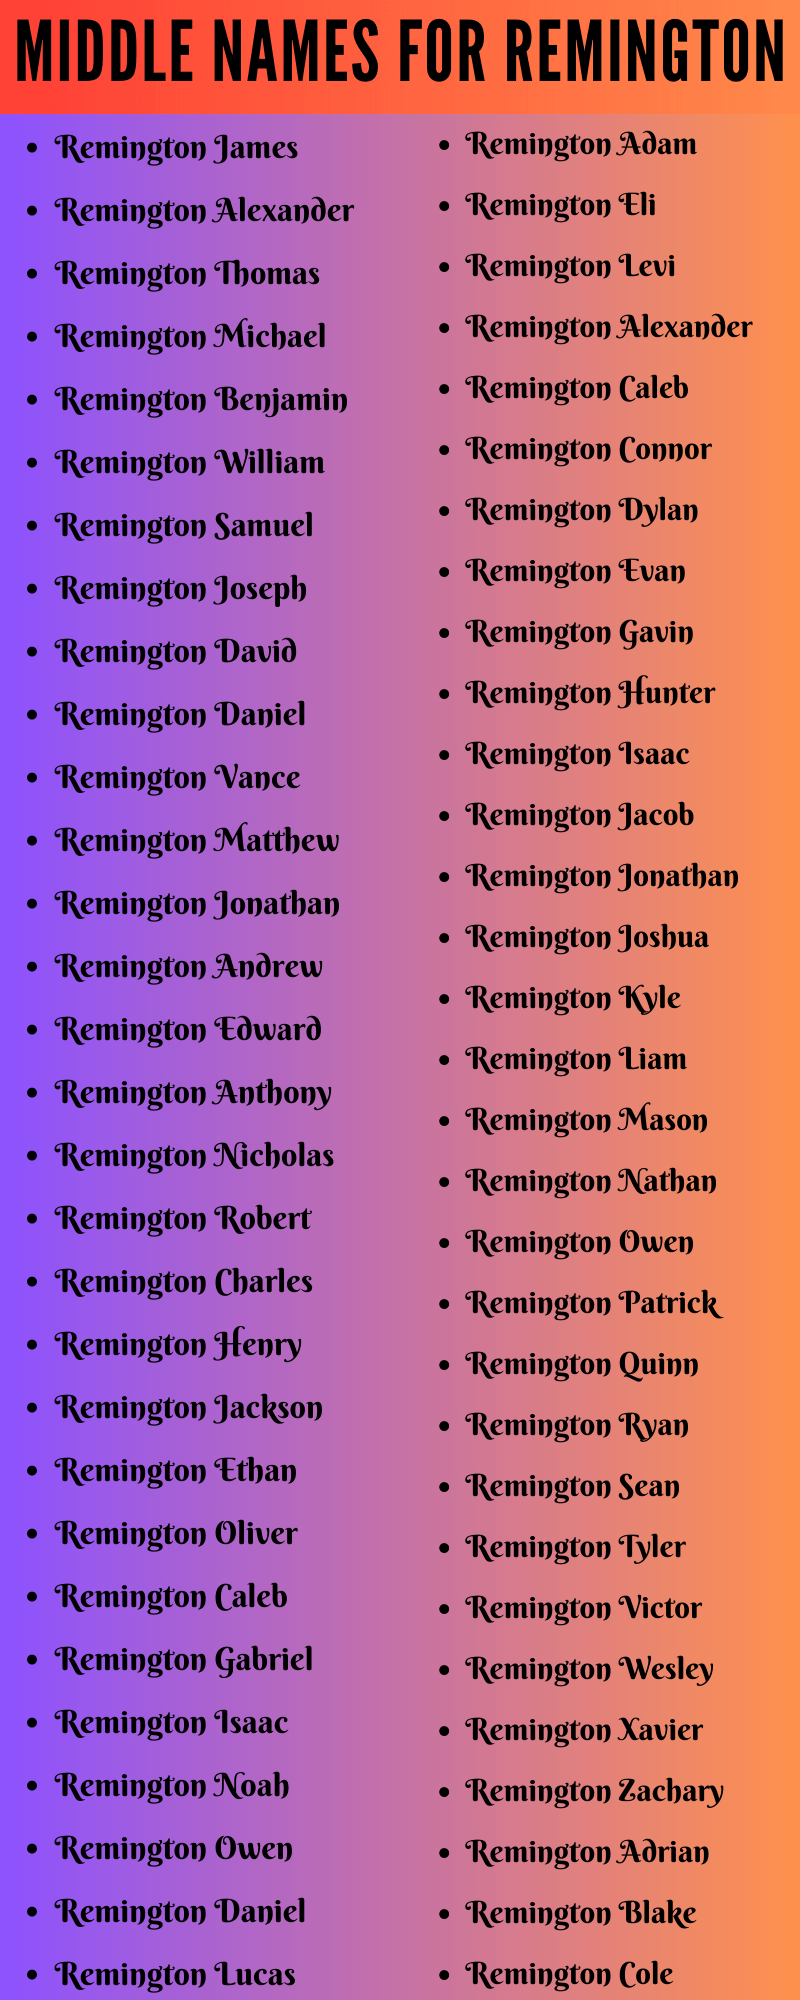 400 Amazing Middle Names For Remington